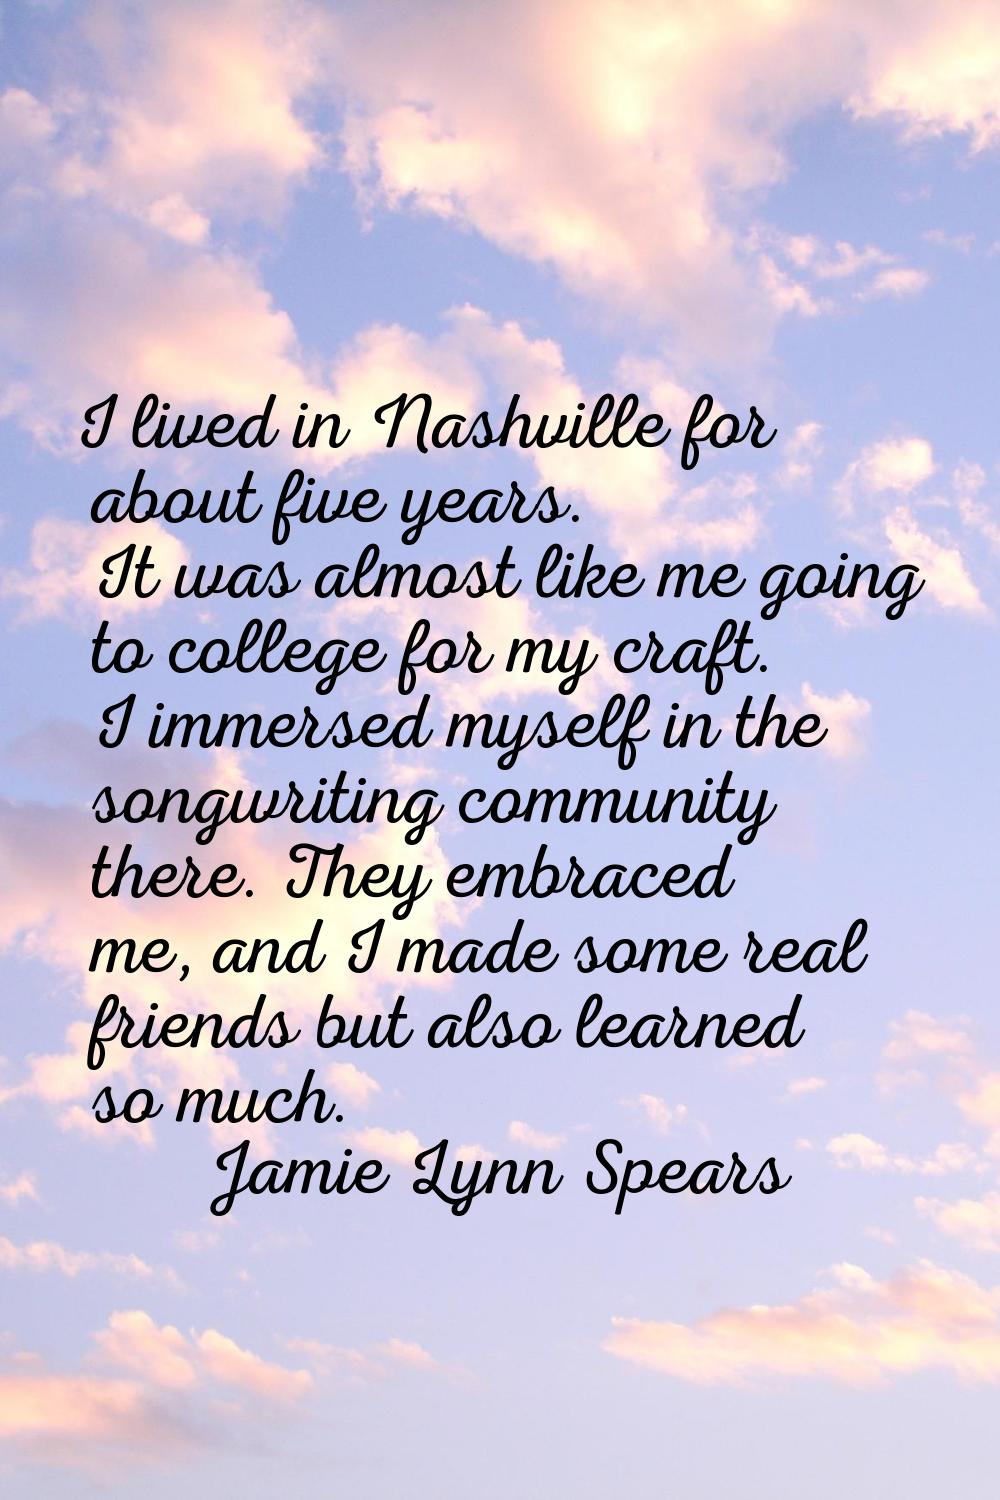 I lived in Nashville for about five years. It was almost like me going to college for my craft. I i